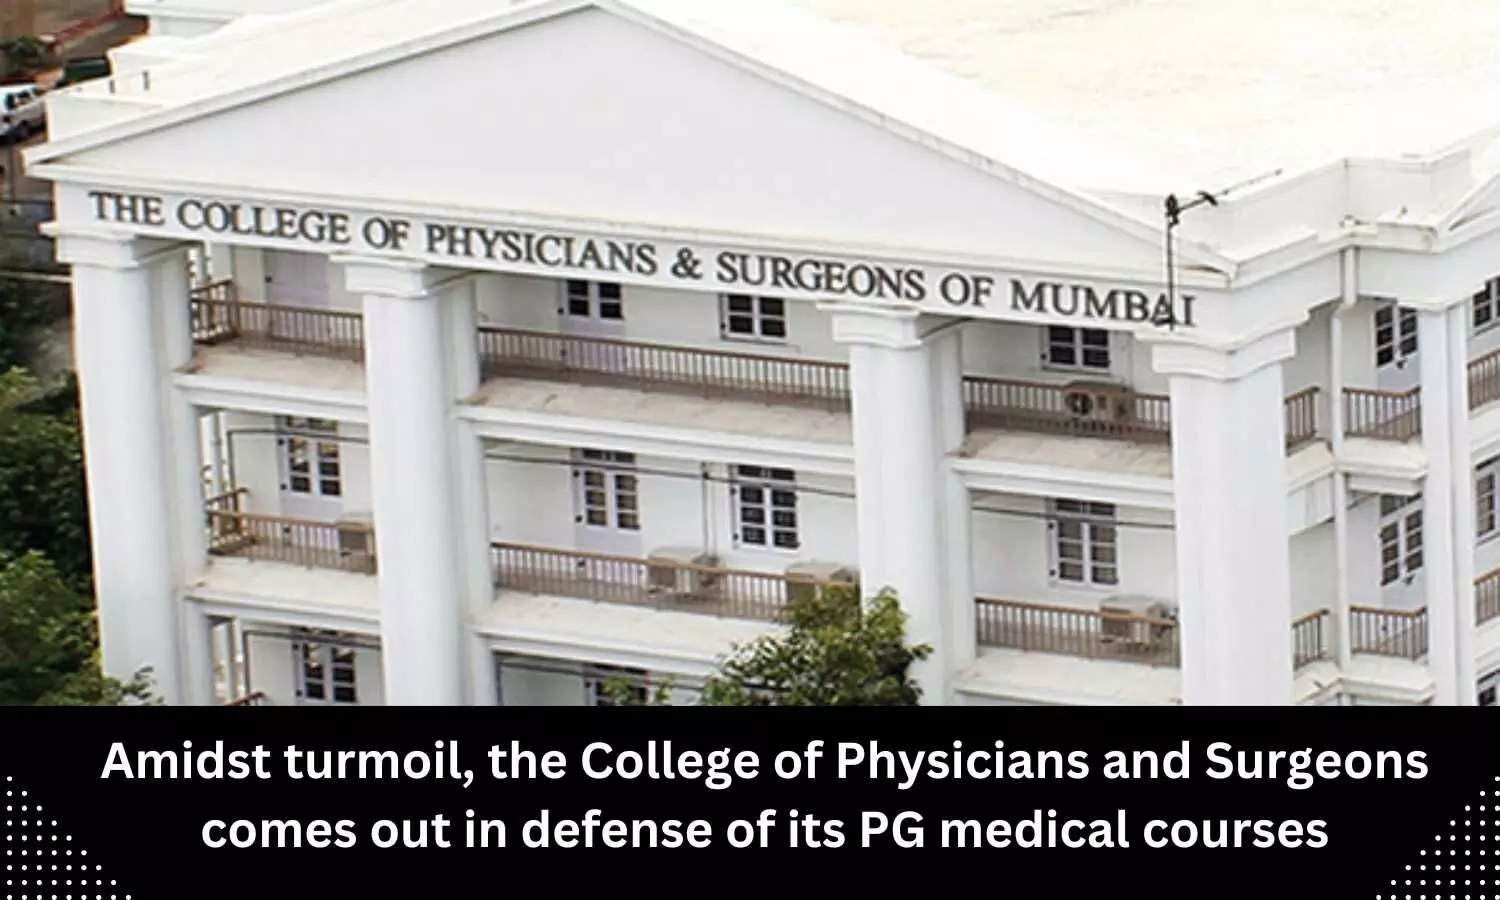 CPS Mumbai comes out in defense of its PG medical courses amidst turmoil